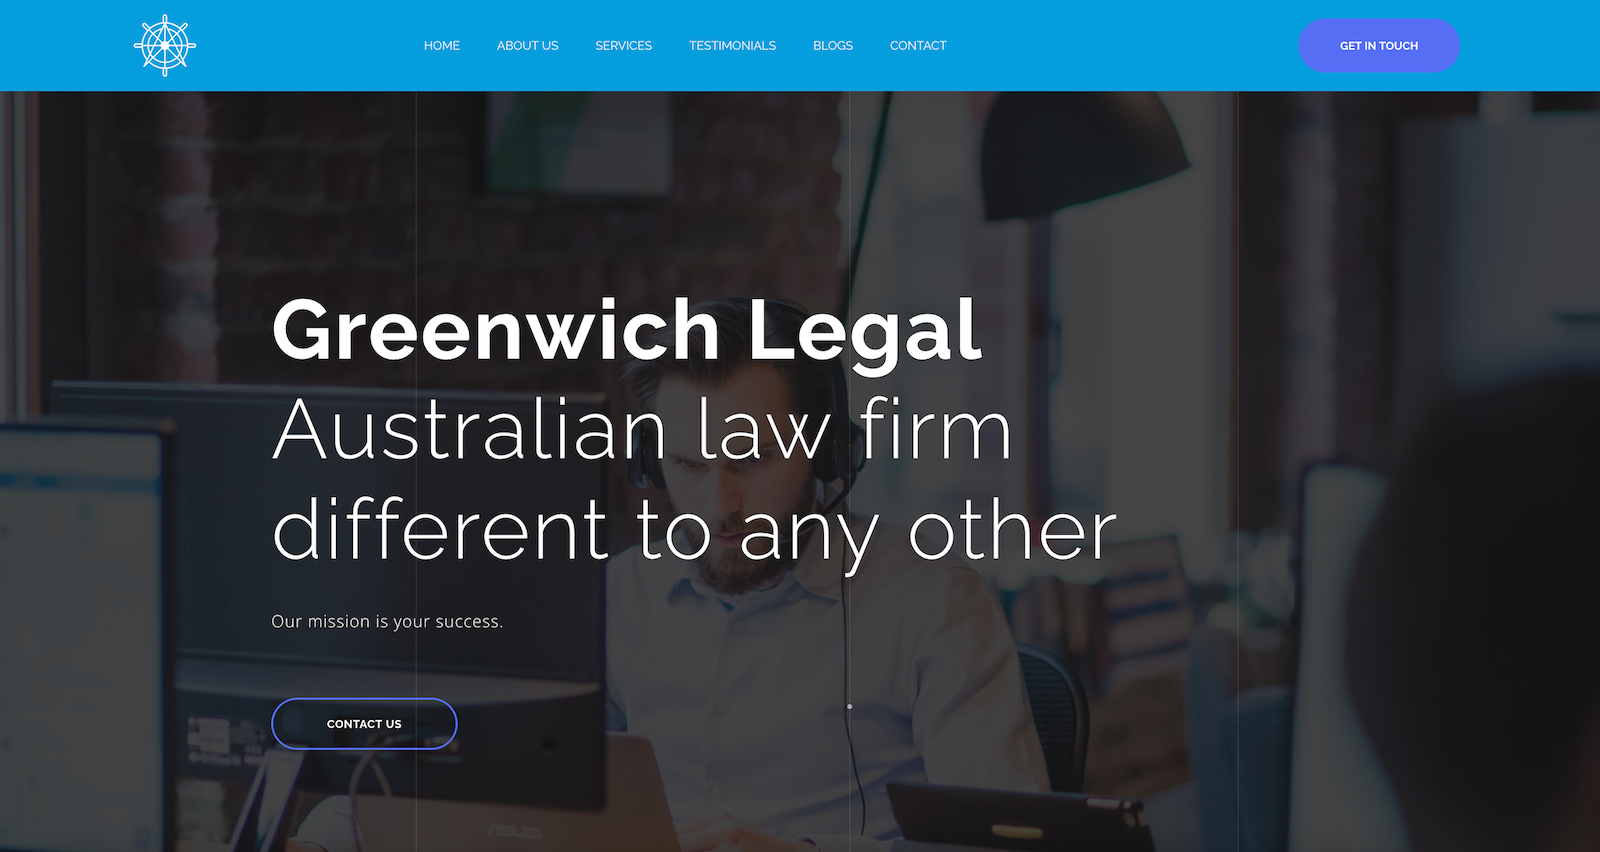 Greenwich Legal Australian law firm different to any other